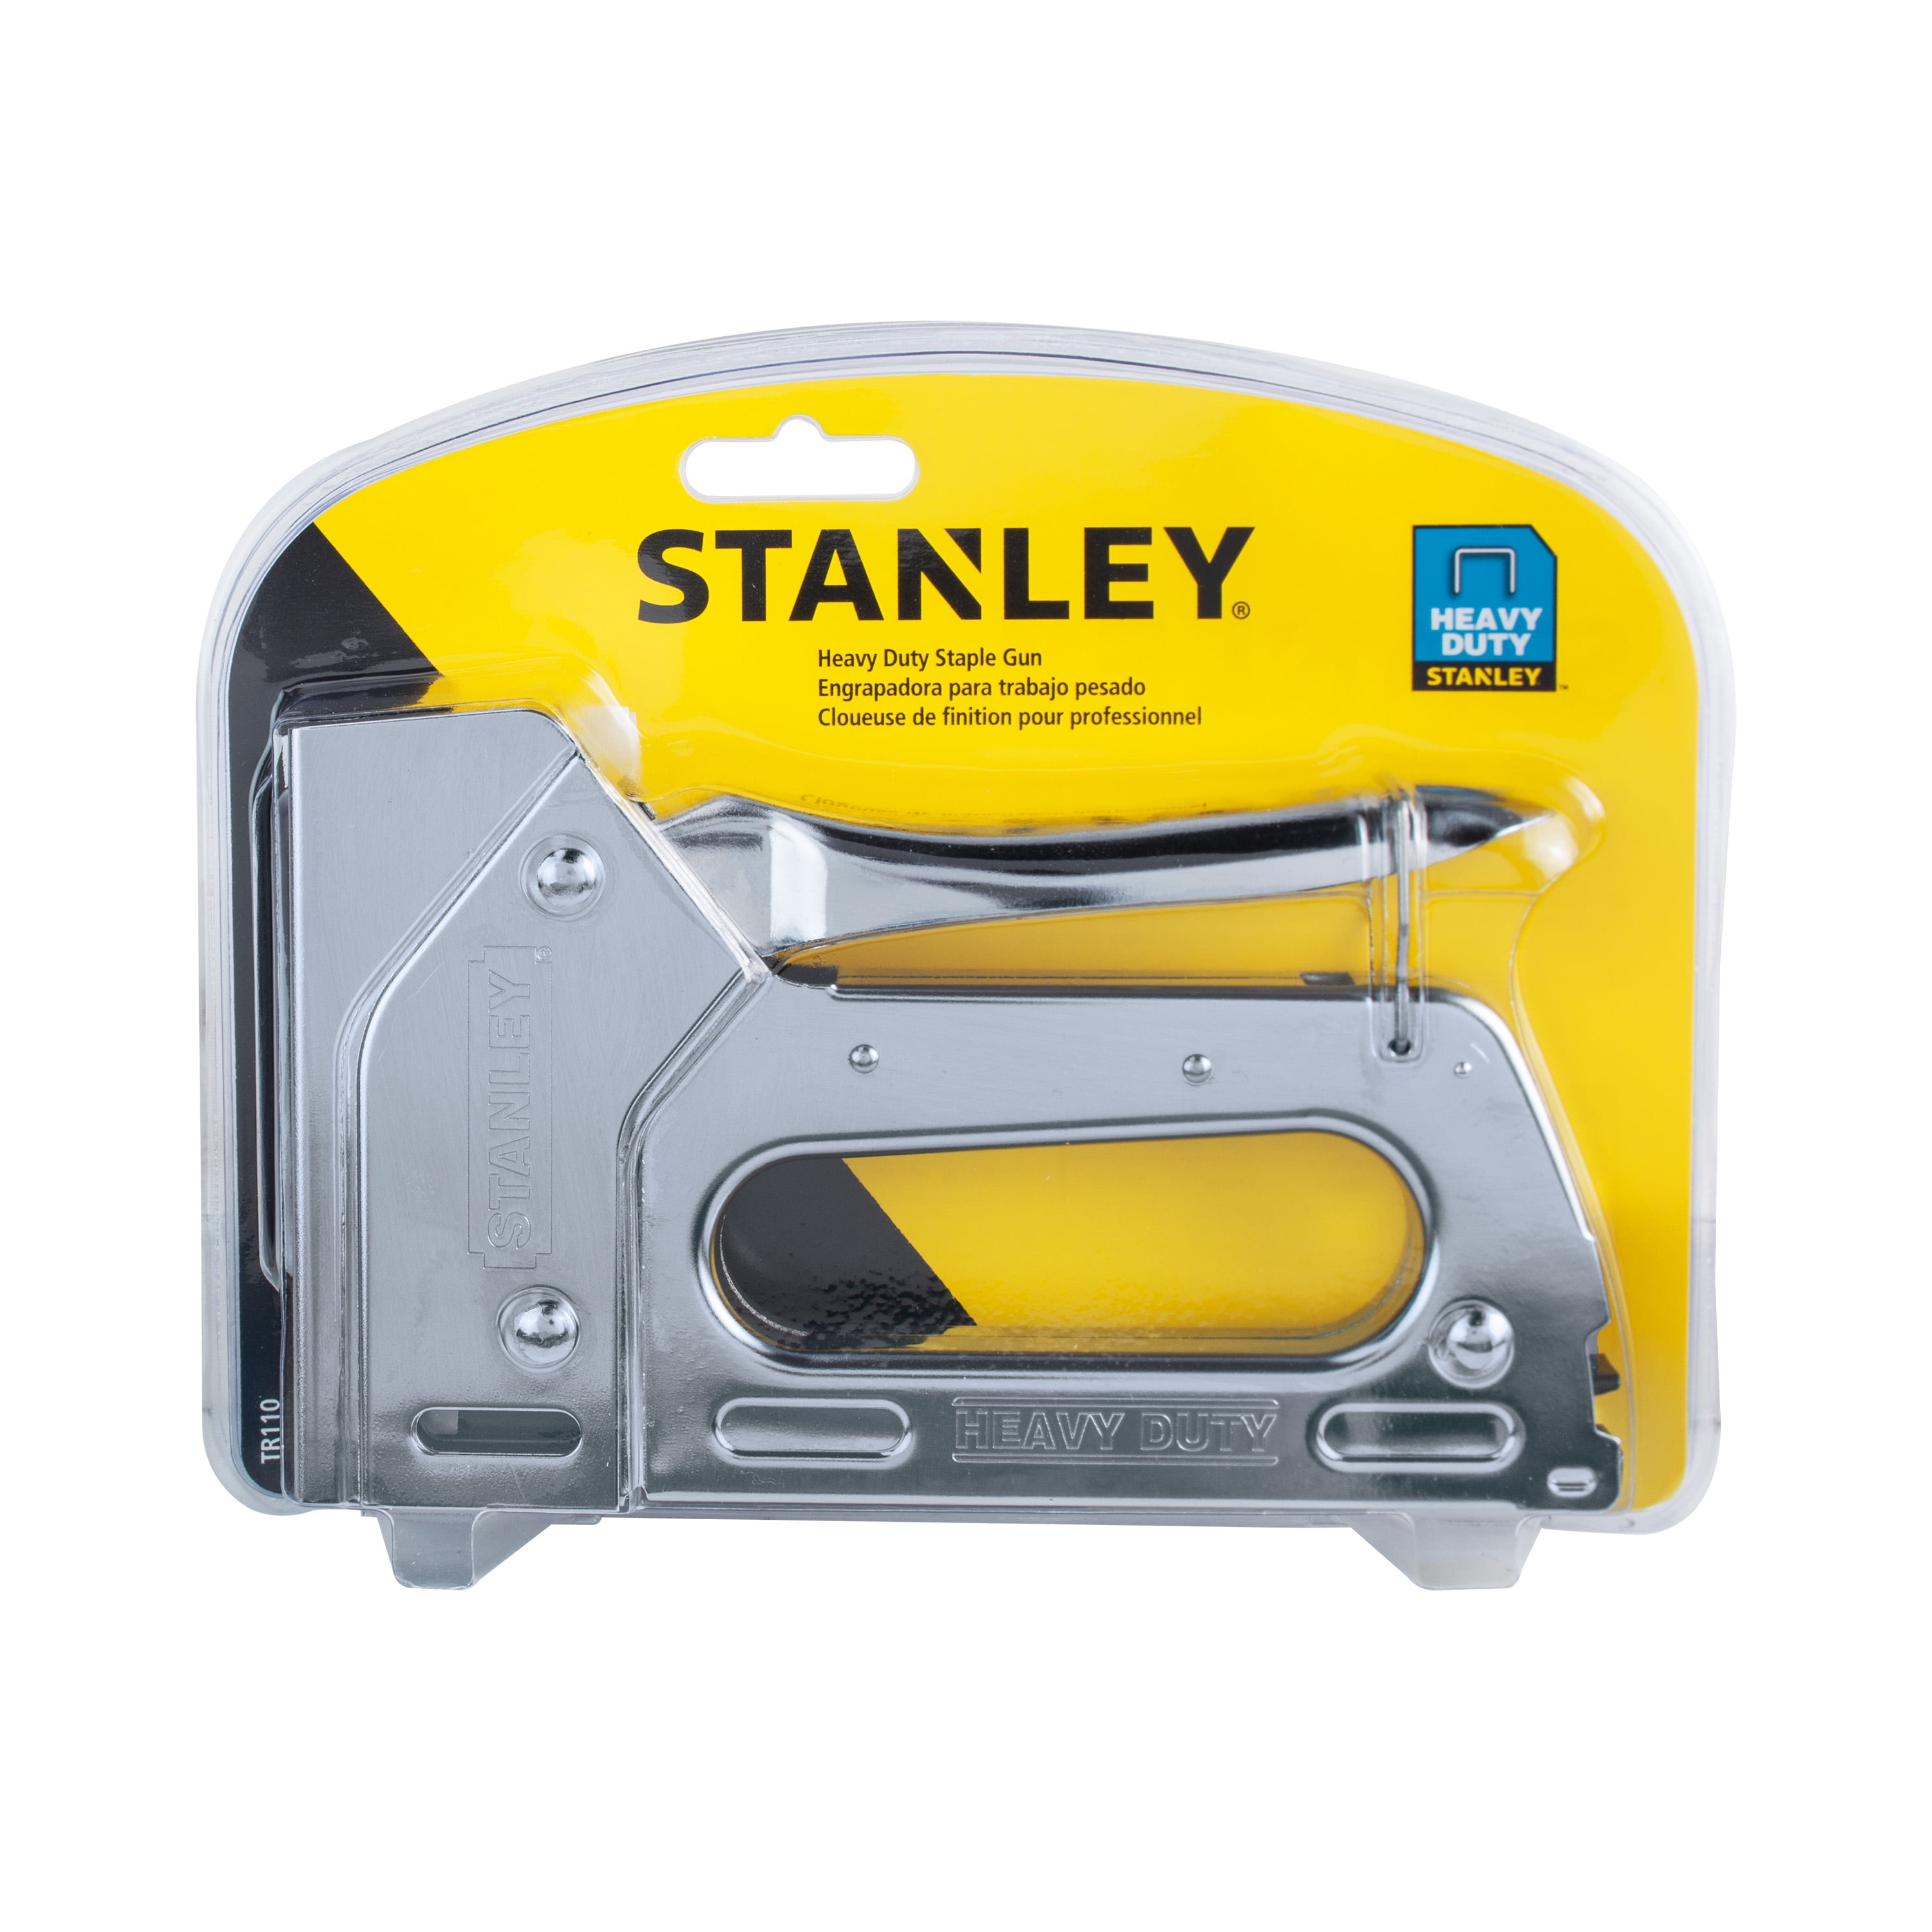 Stanley Bostitch - Cordless Framing Nailer: 2 to 3-1/2″ Nail Length -  39069927 - MSC Industrial Supply